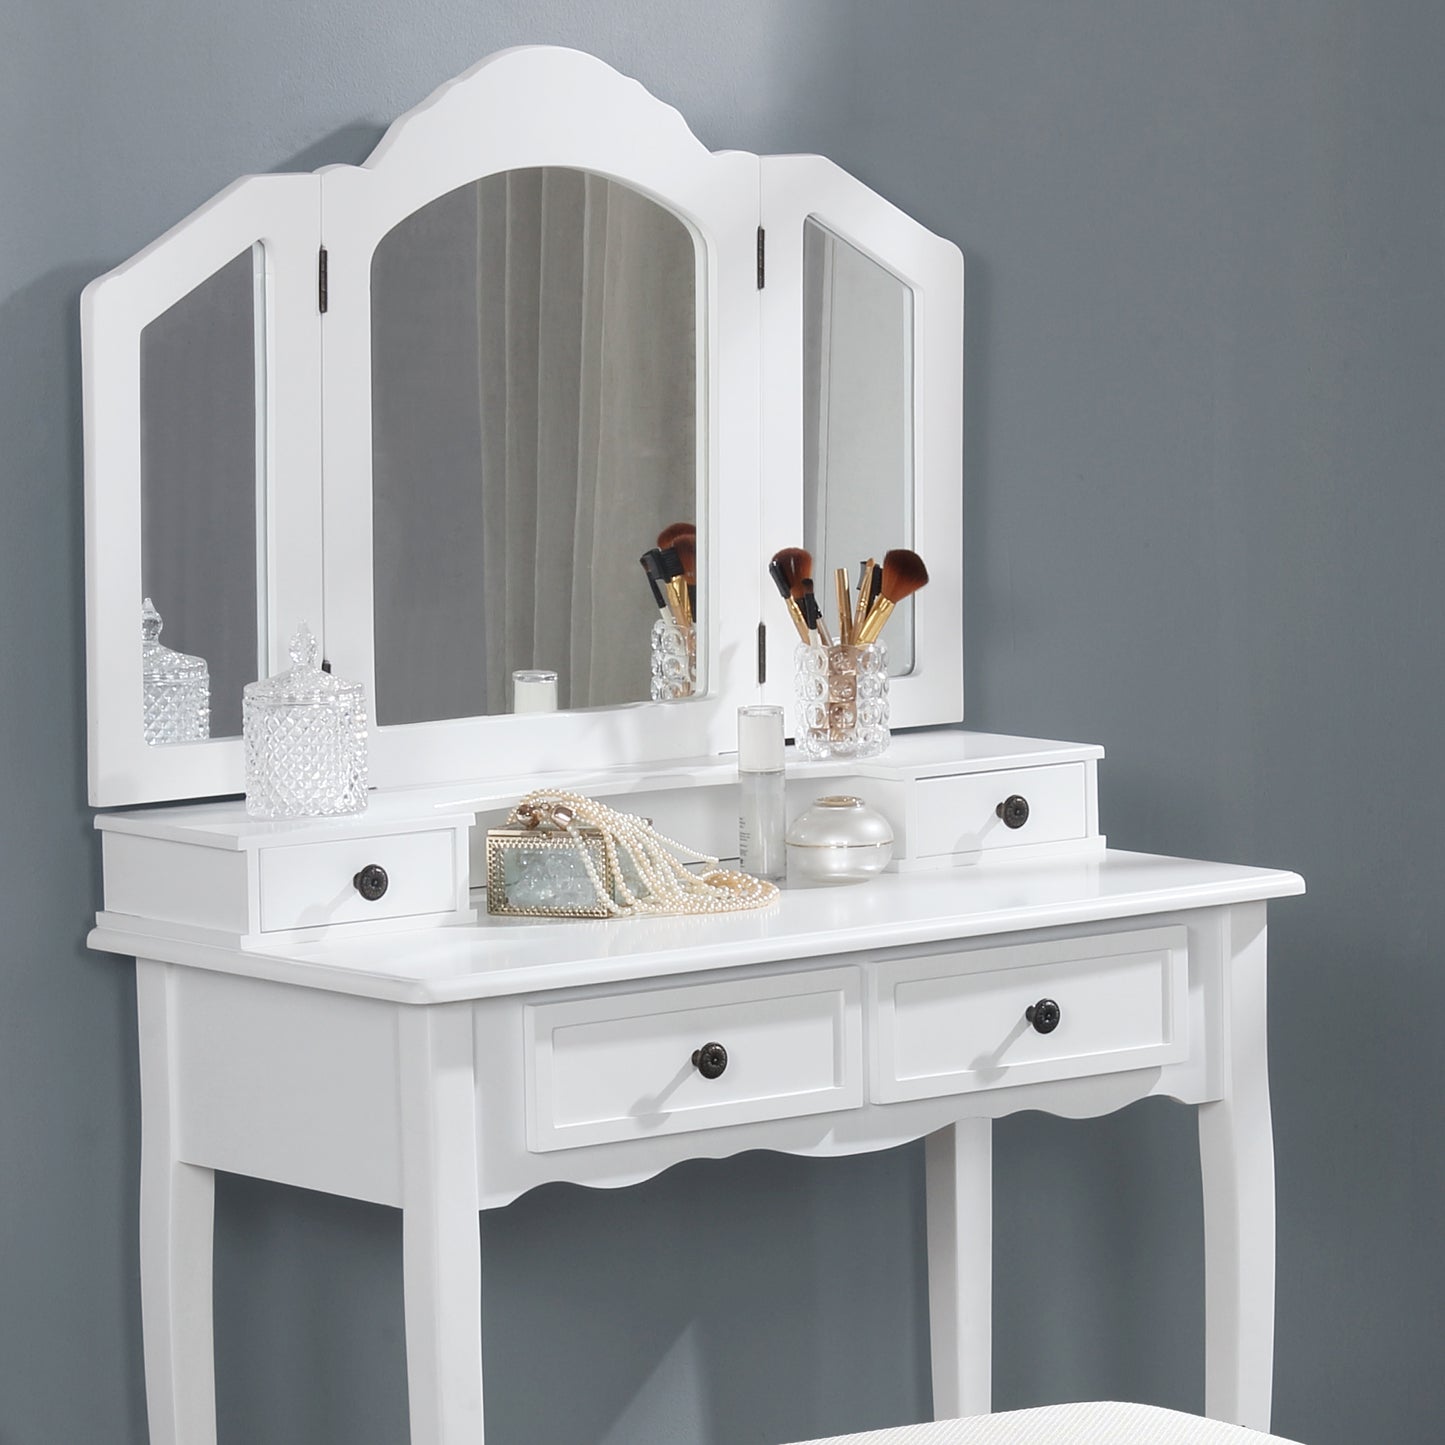 Sanlo White Wooden Vanity, Make Up Table and Stool Set